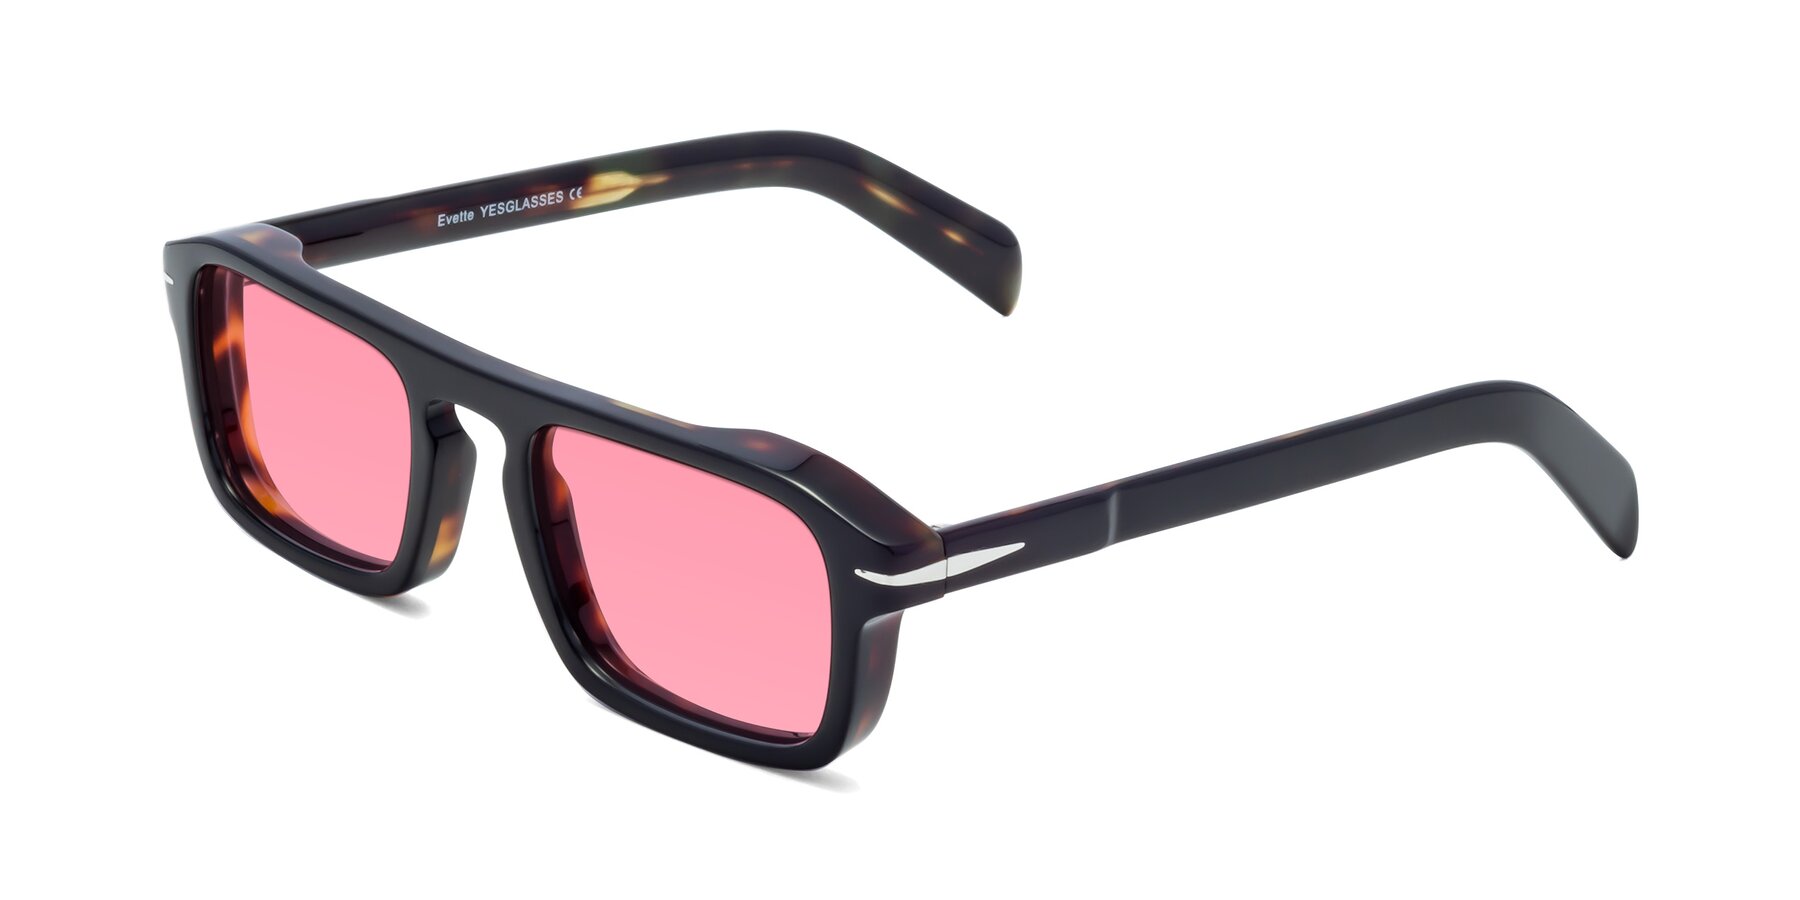 Angle of Evette in Black-Tortoise with Pink Tinted Lenses